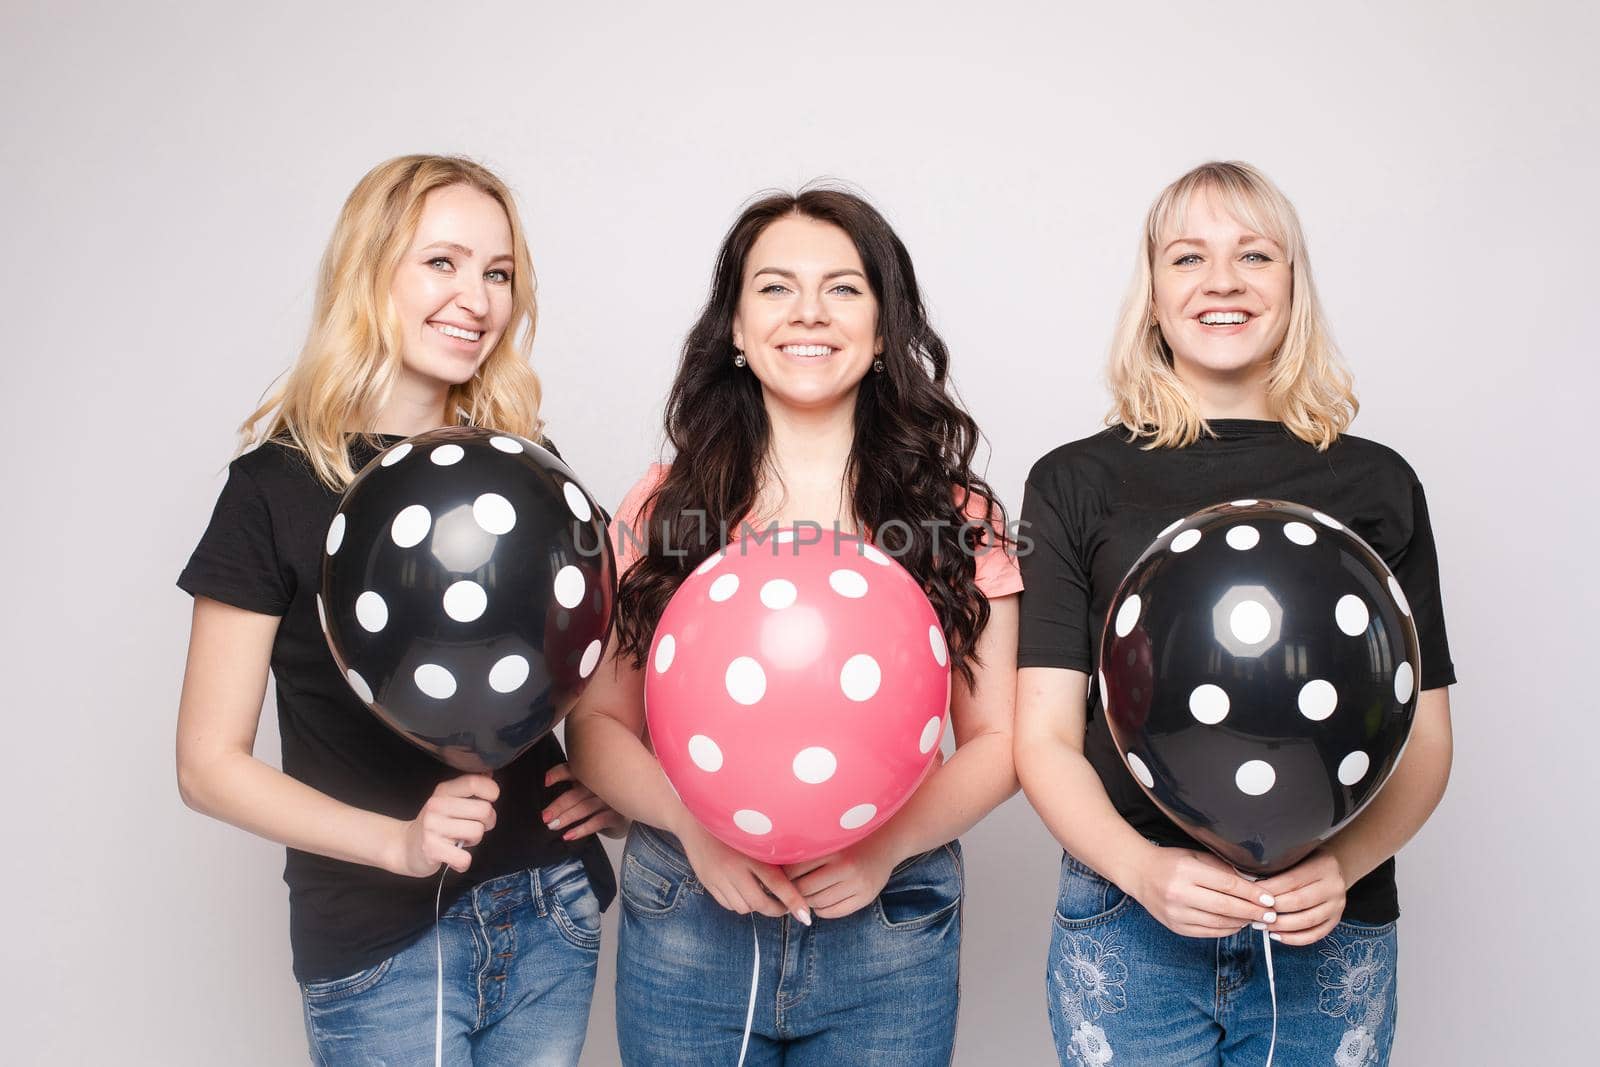 Three female friends celebrating a party event having fun and smiling with balloons